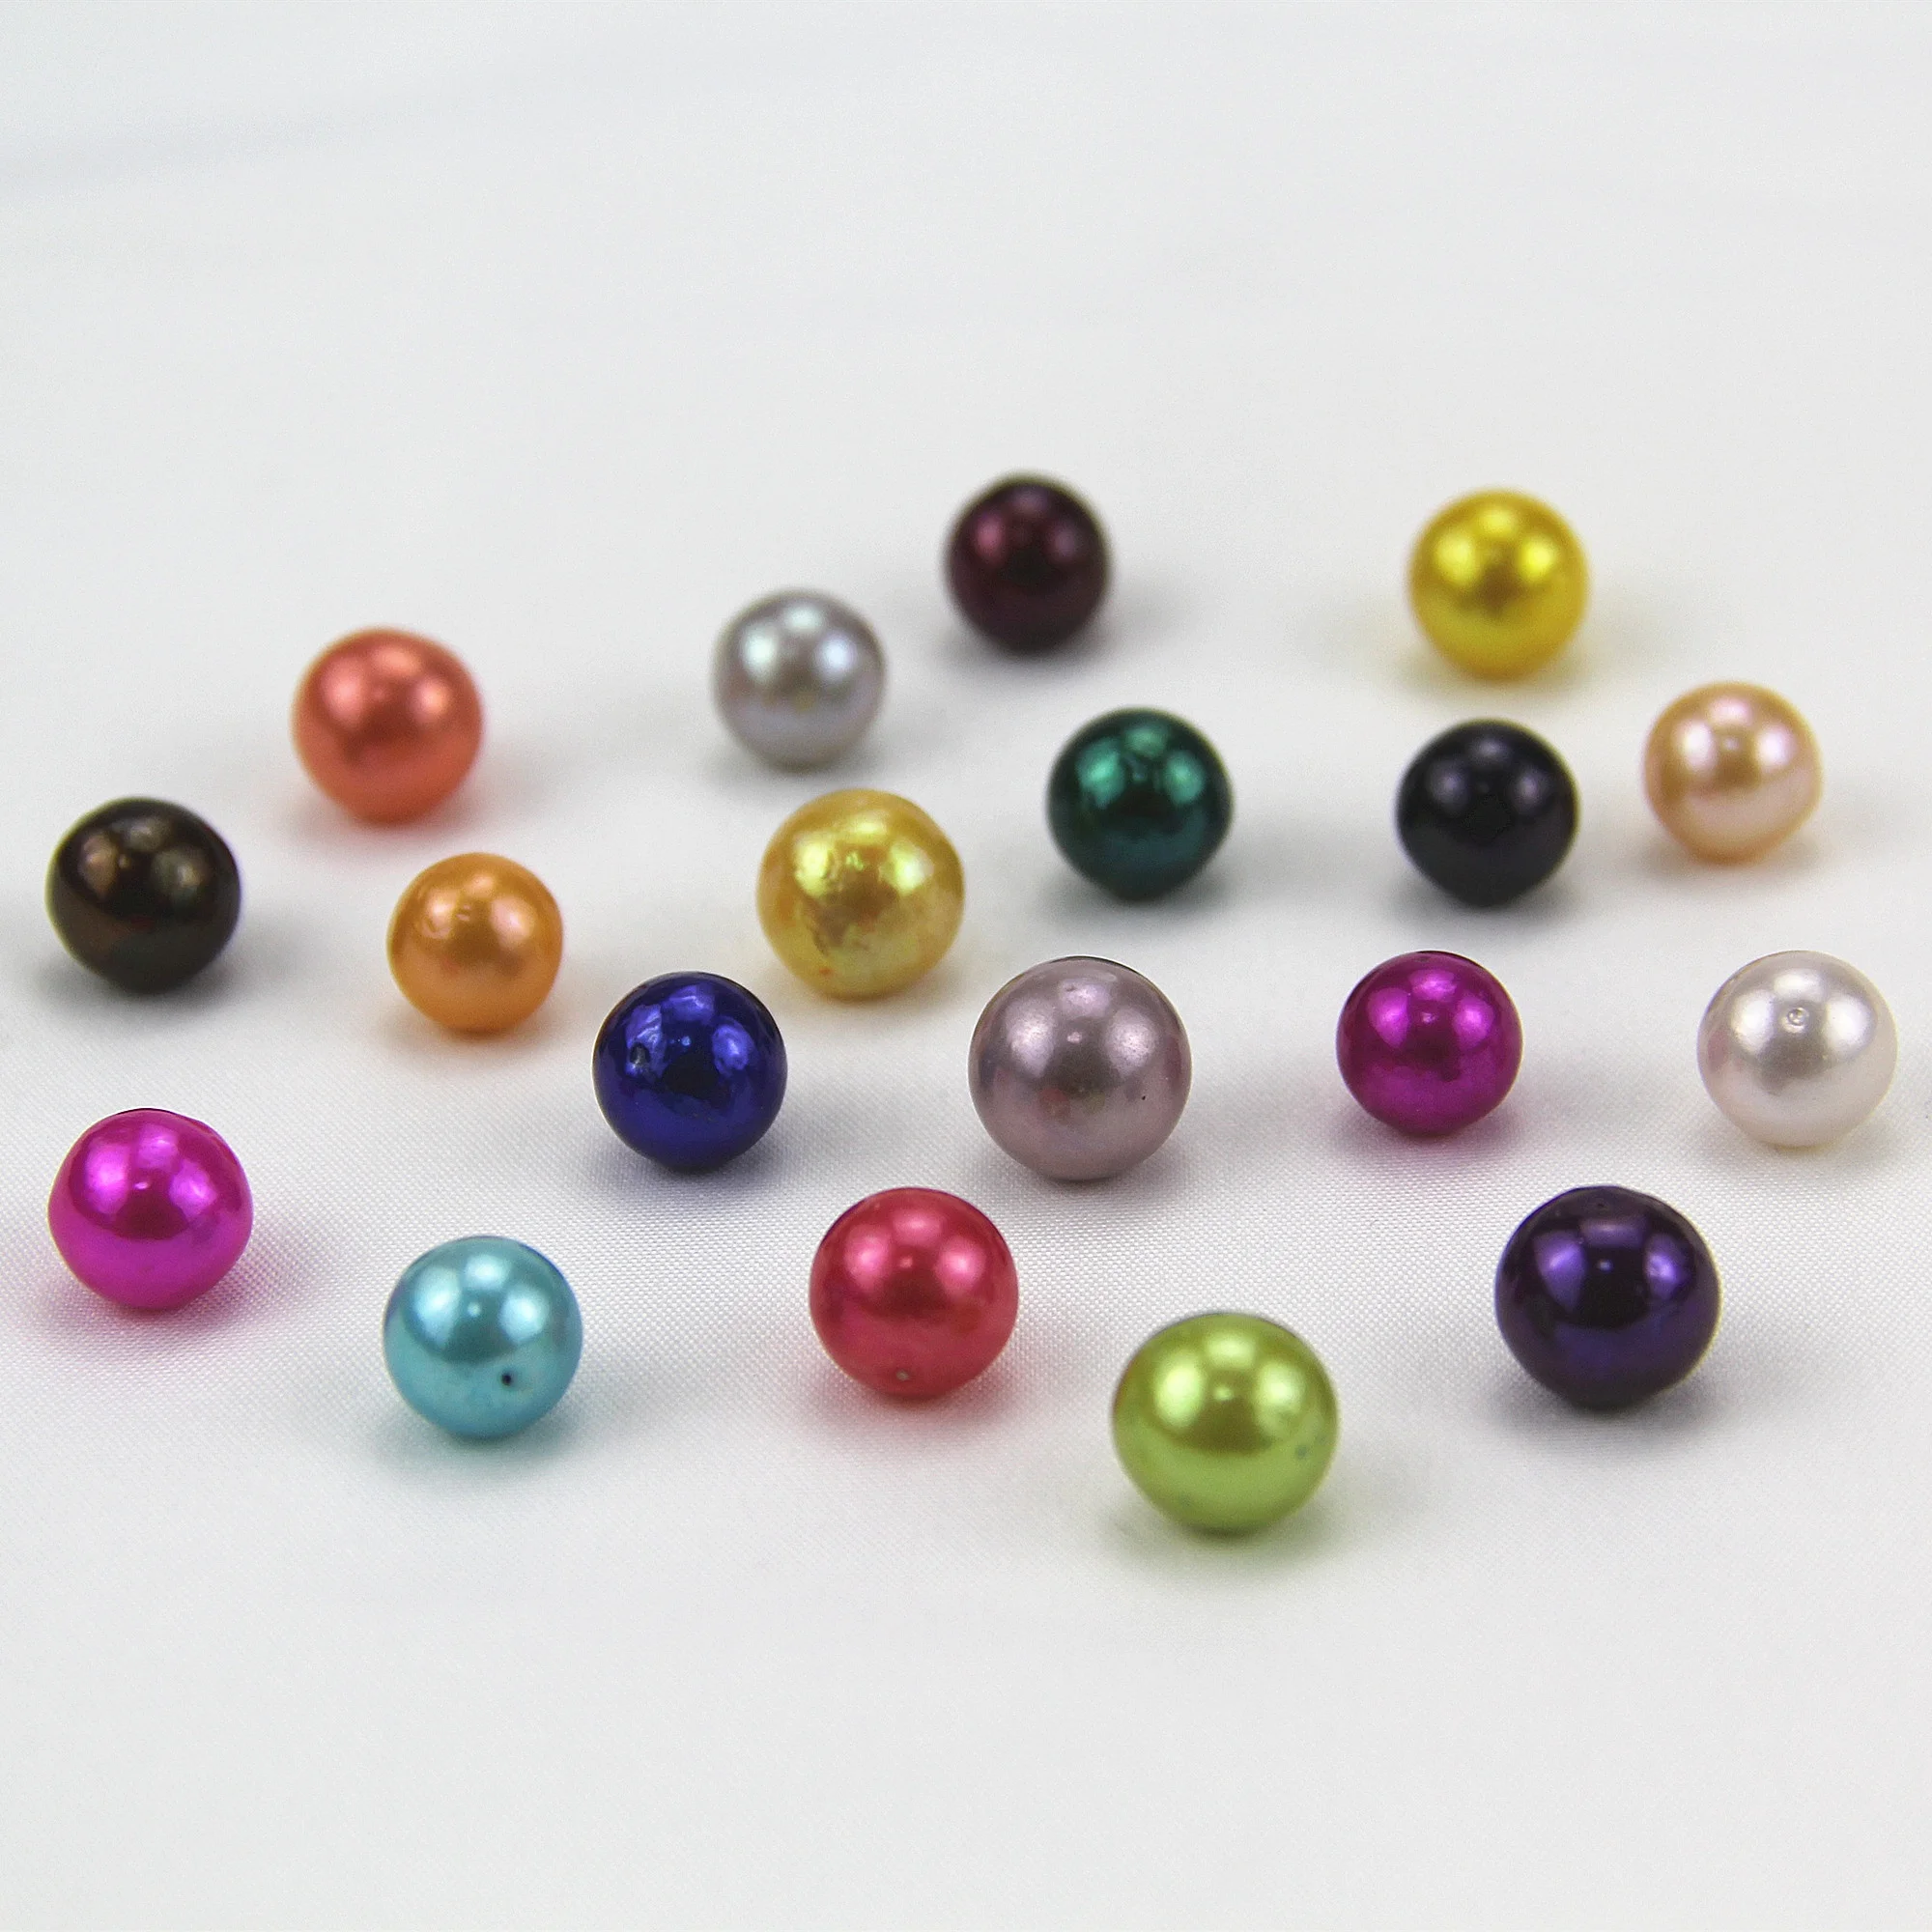 

9-13mm Edison pearl,Wholesale Loose Round Genuine Real Cultured Freshwater Natural Pearl For Sale